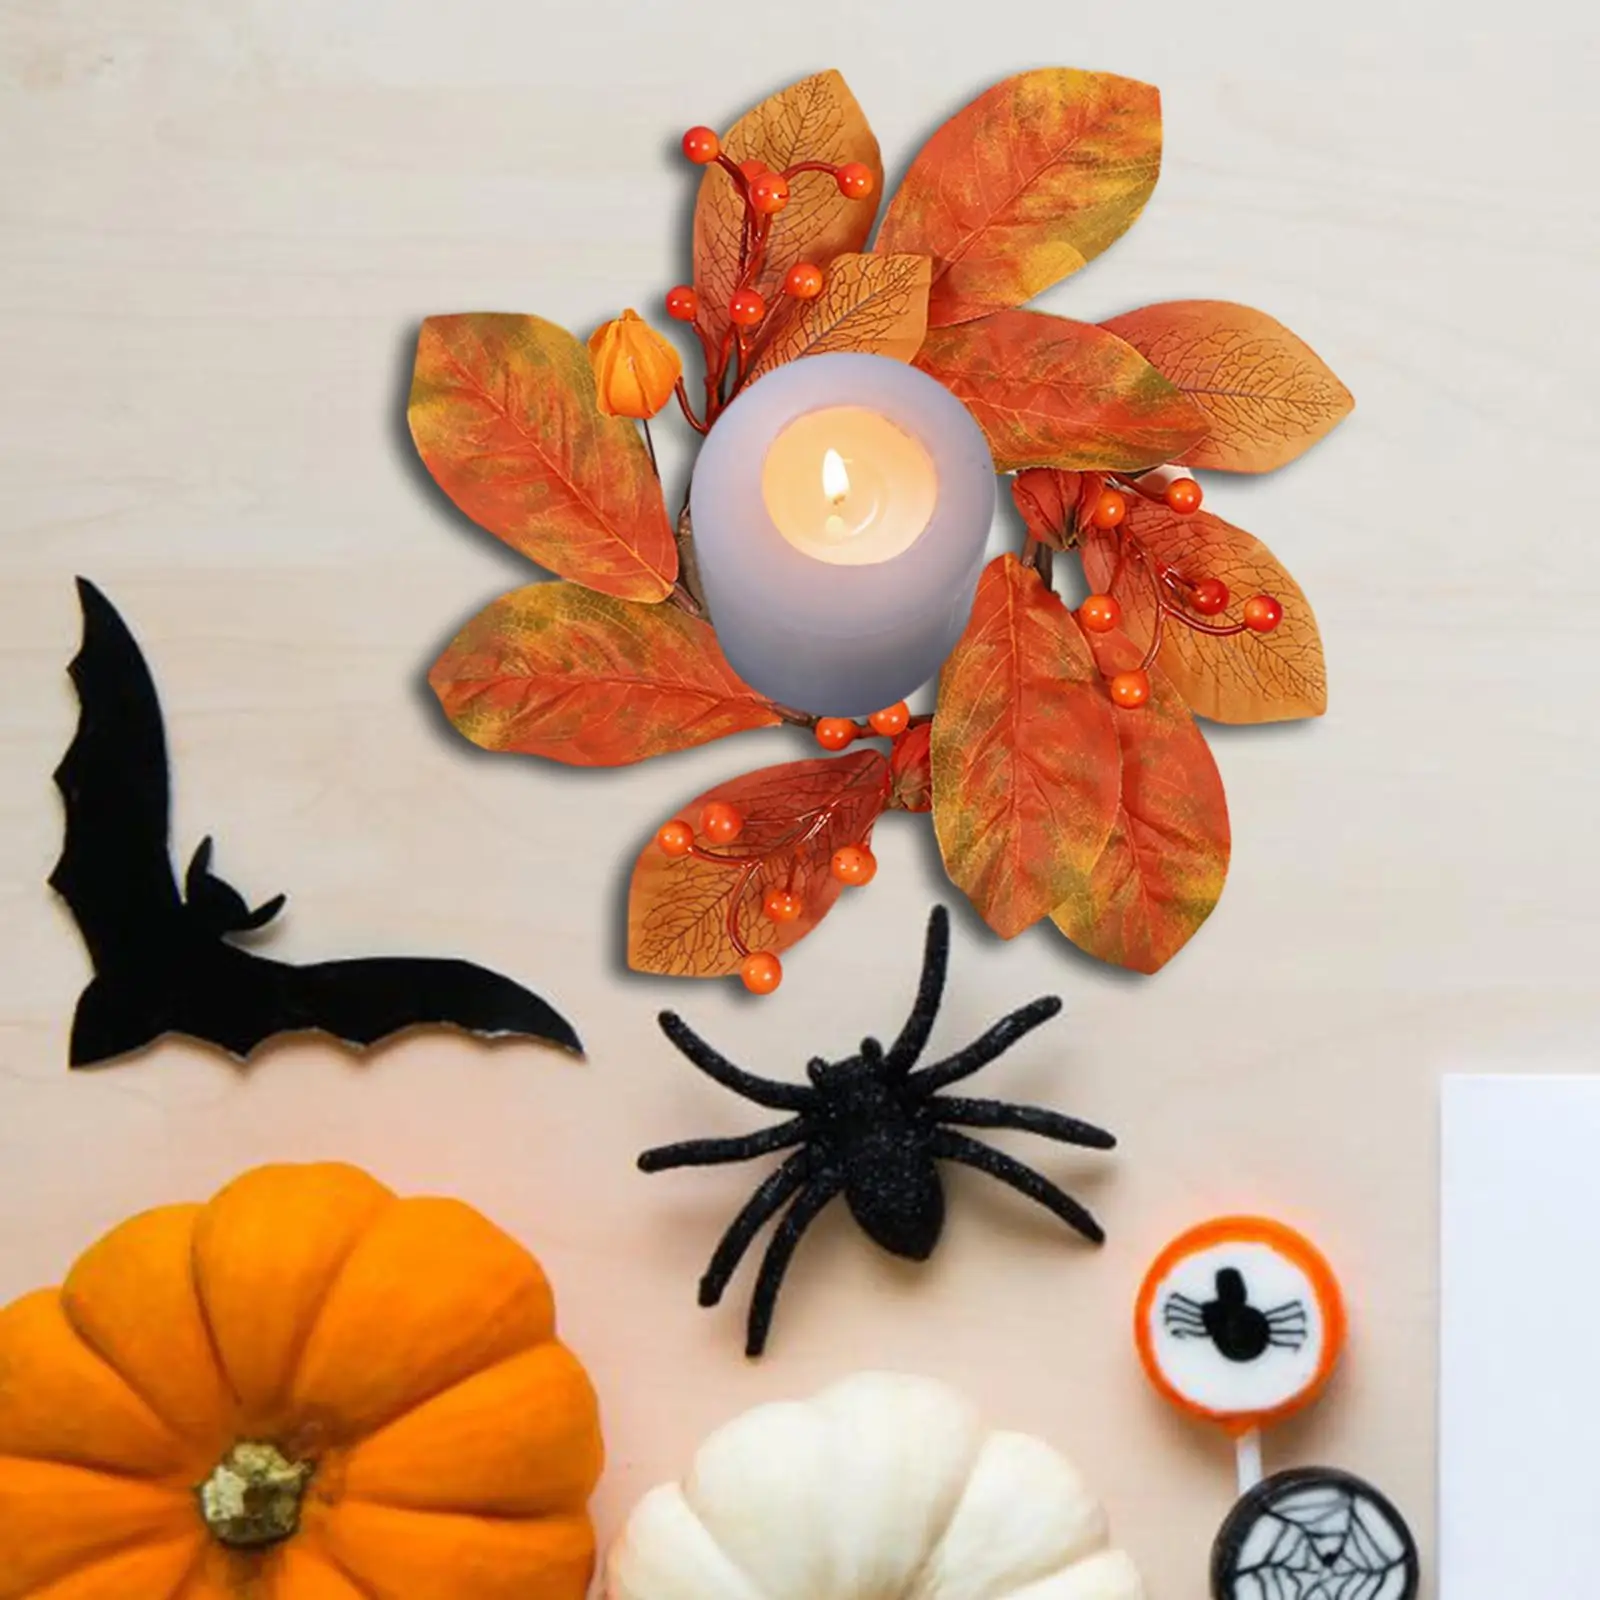 Mini Fall Candle Wreaths Rings Floral Arrangement Table Centerpieces Autumn Candle Rings for Tabletop Cafe Bar Party Farmhouse